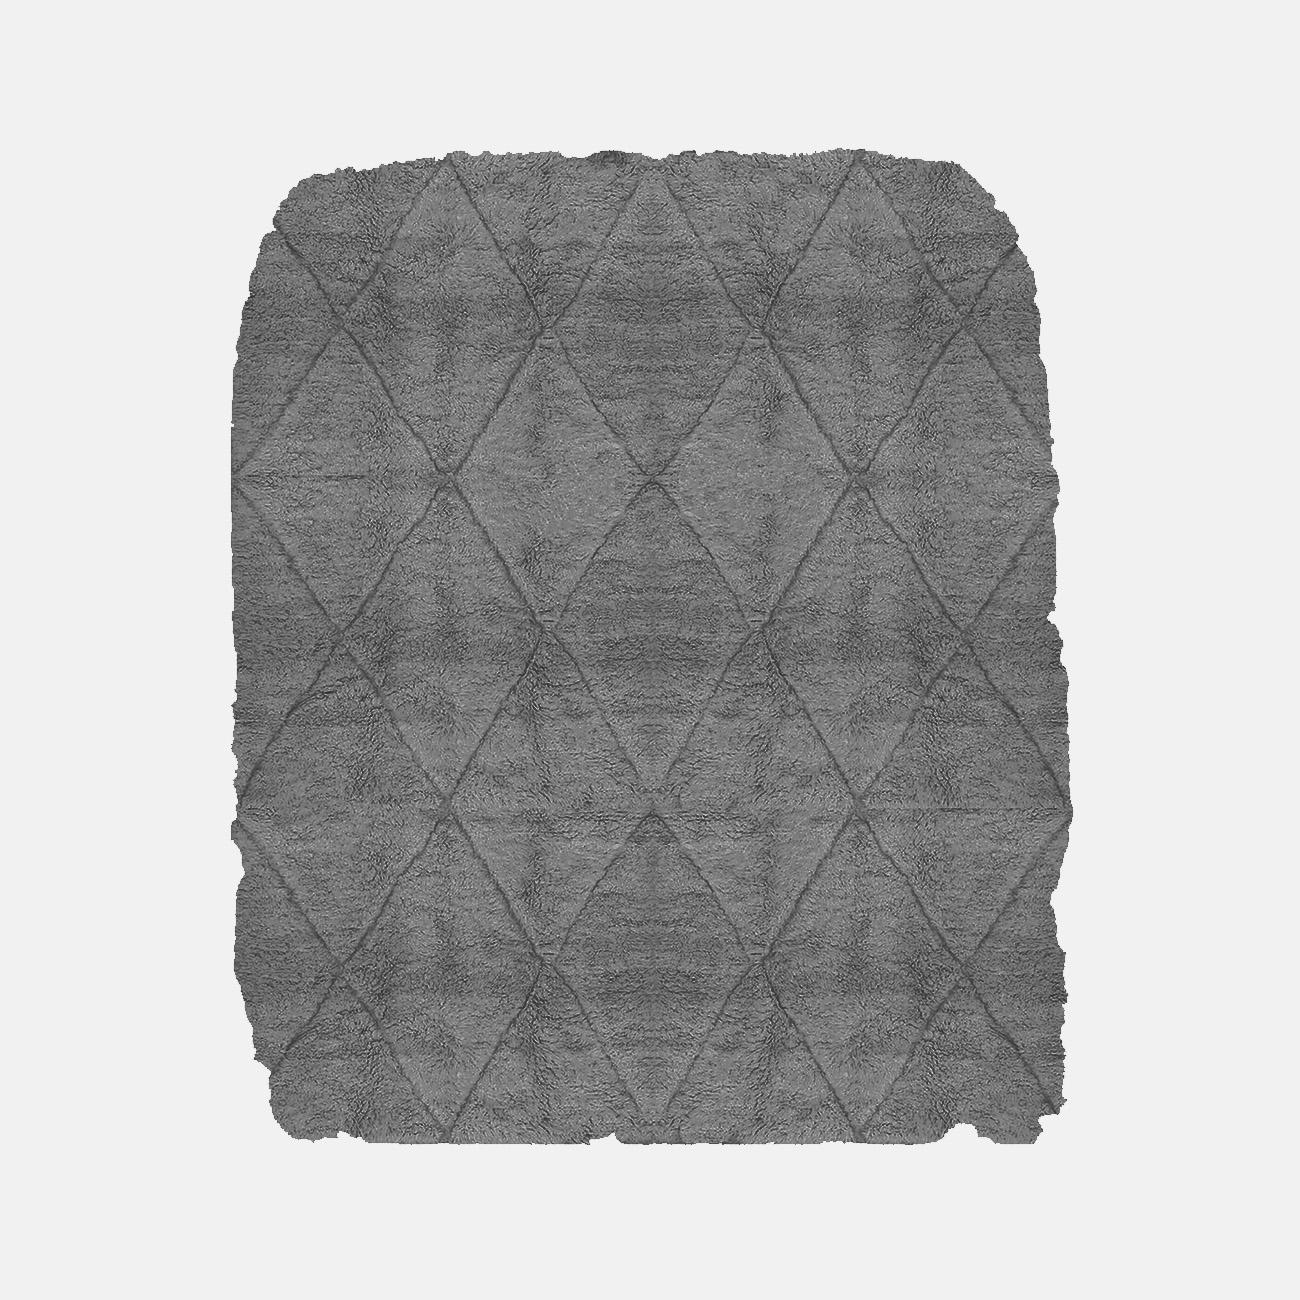 Oddero Asti Rug by Atelier Bowy C.D.
Dimensions: W 243 x L 300 cm.
Materials: Wool.

Available in W140 x L220, W170 x L240, W210 x L300, W230 x L300, W243 x L300 cm.

Atelier Bowy C.D. is dedicated to crafting contemporary handmade rugs for